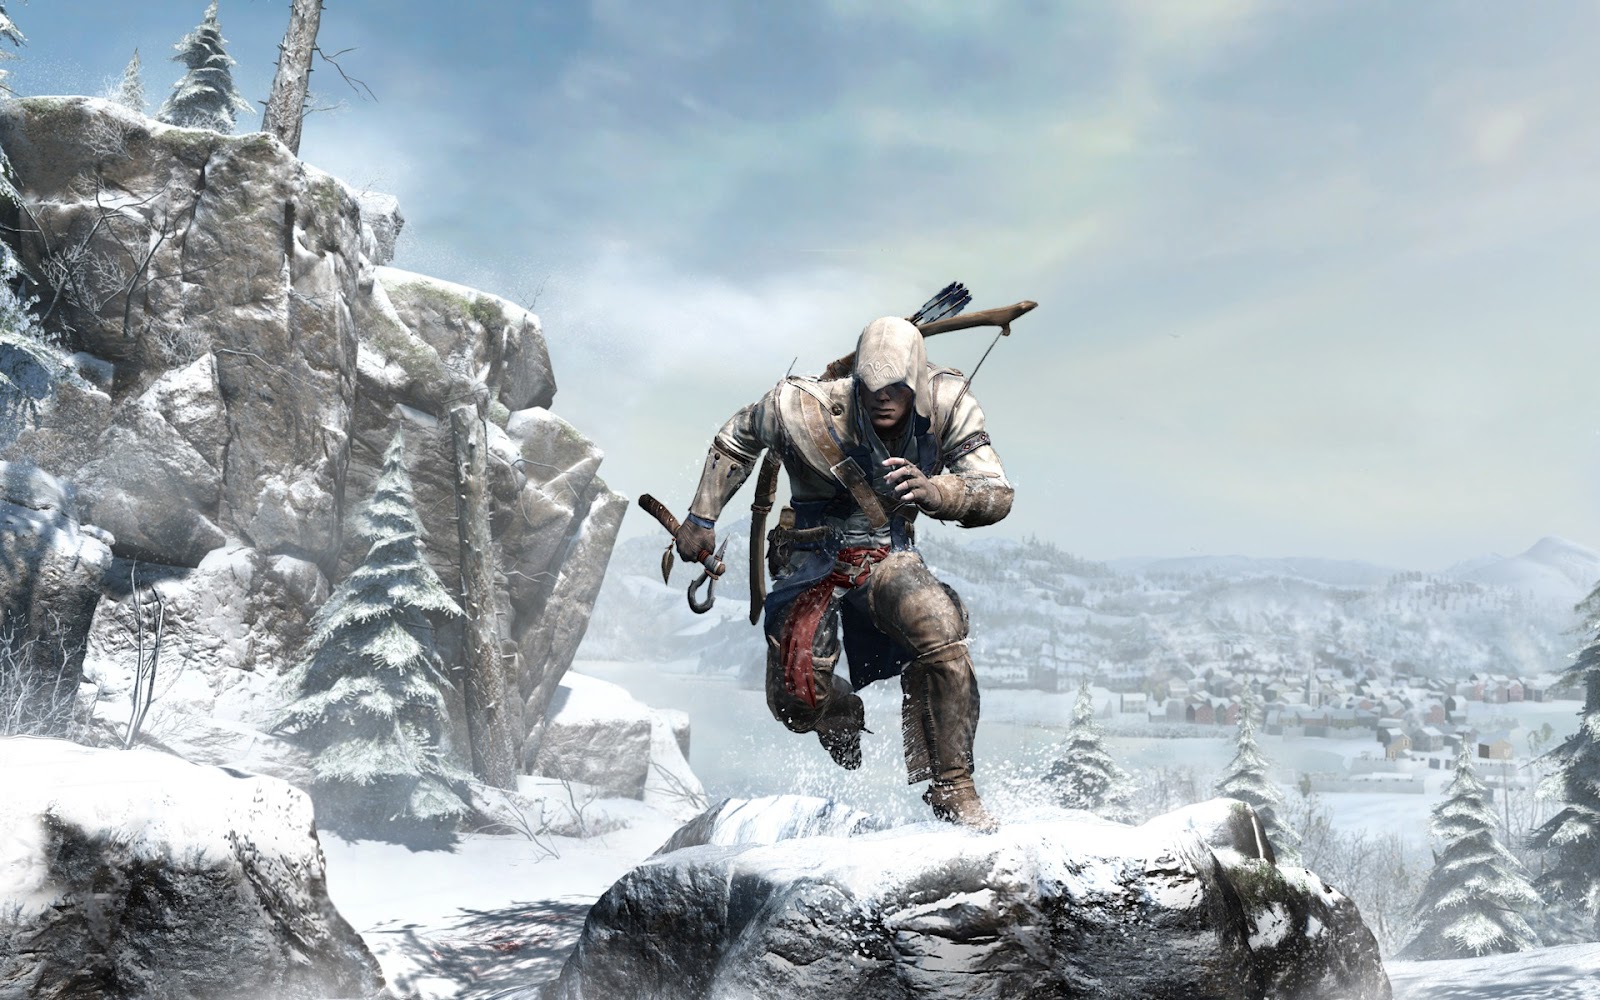 Assassin's Creed III Wallpapers and Theme for Windows 7 ...